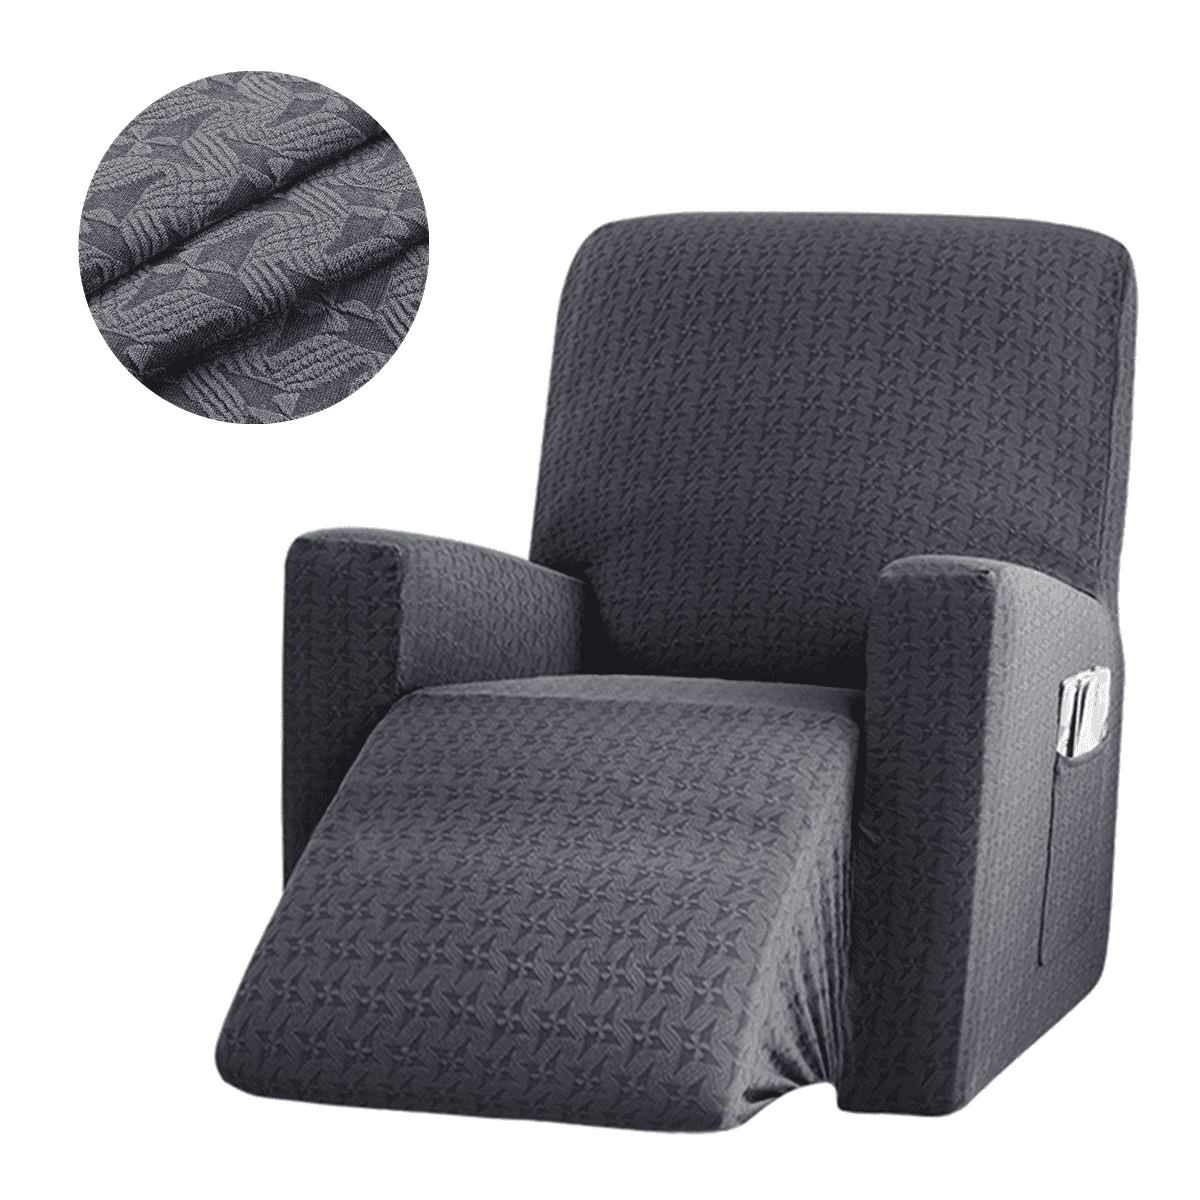 Details about   Anti-Slip Stretch Furniture Couch Chair Recliner for Lazy Boy Cover Slipcover 